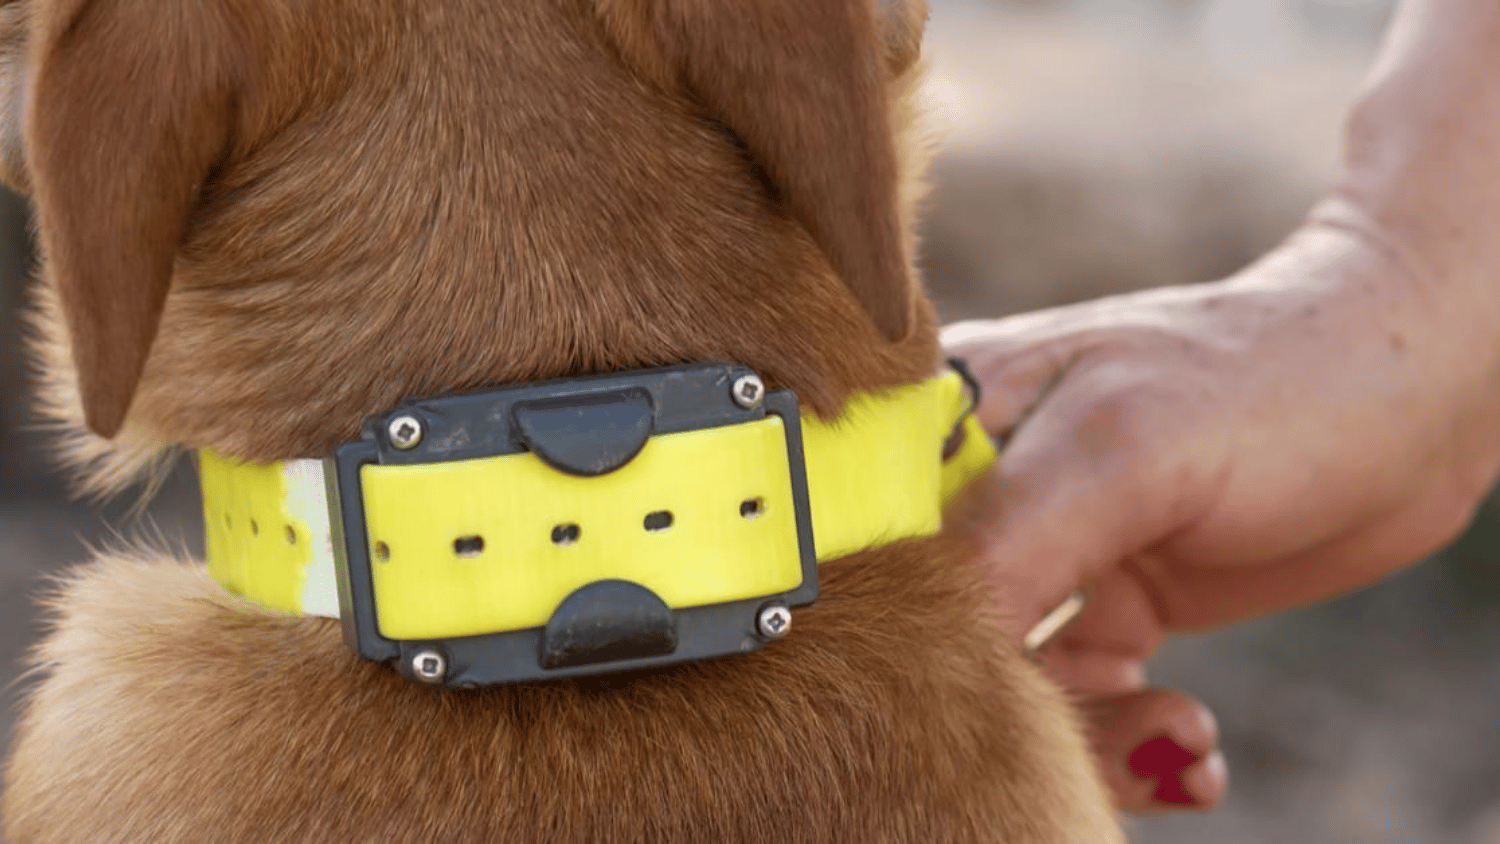 How To Train a Dog With a Shock Collar